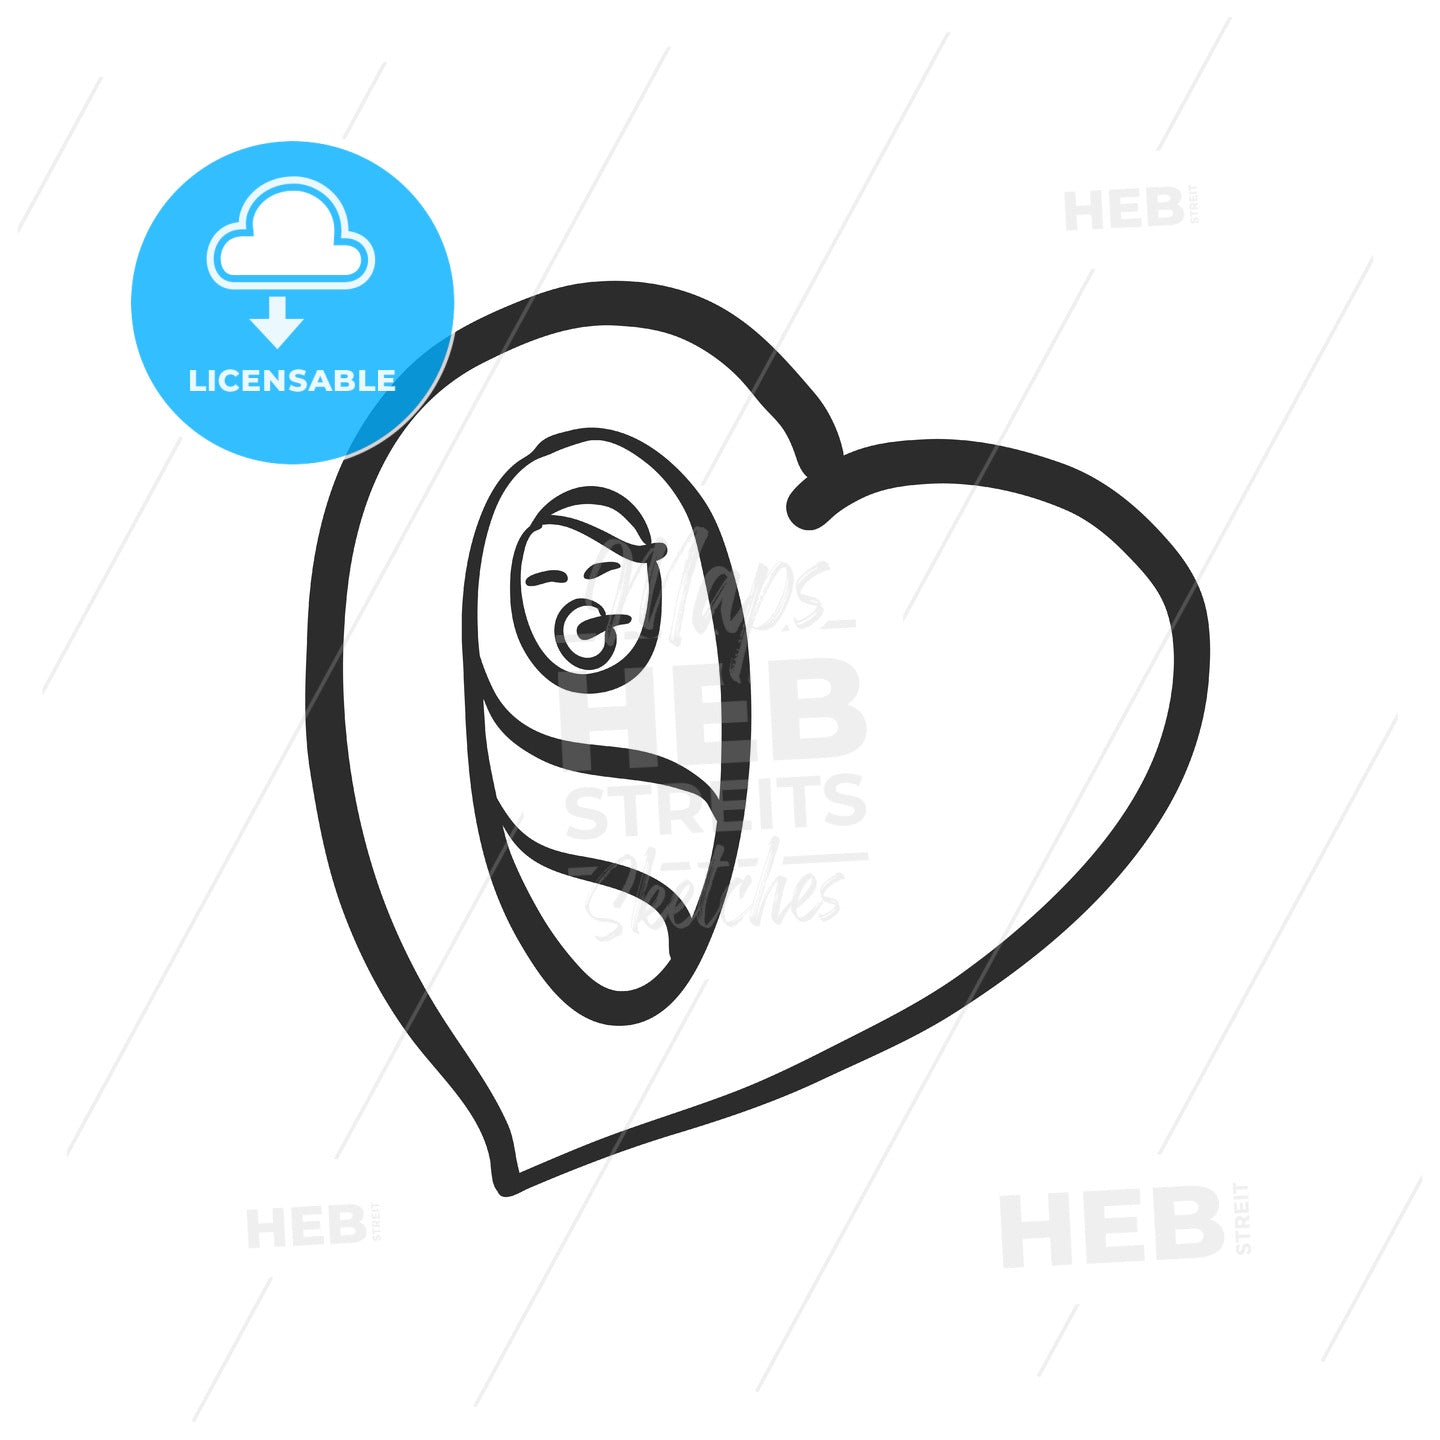 Newborn baby icon in heart – instant download